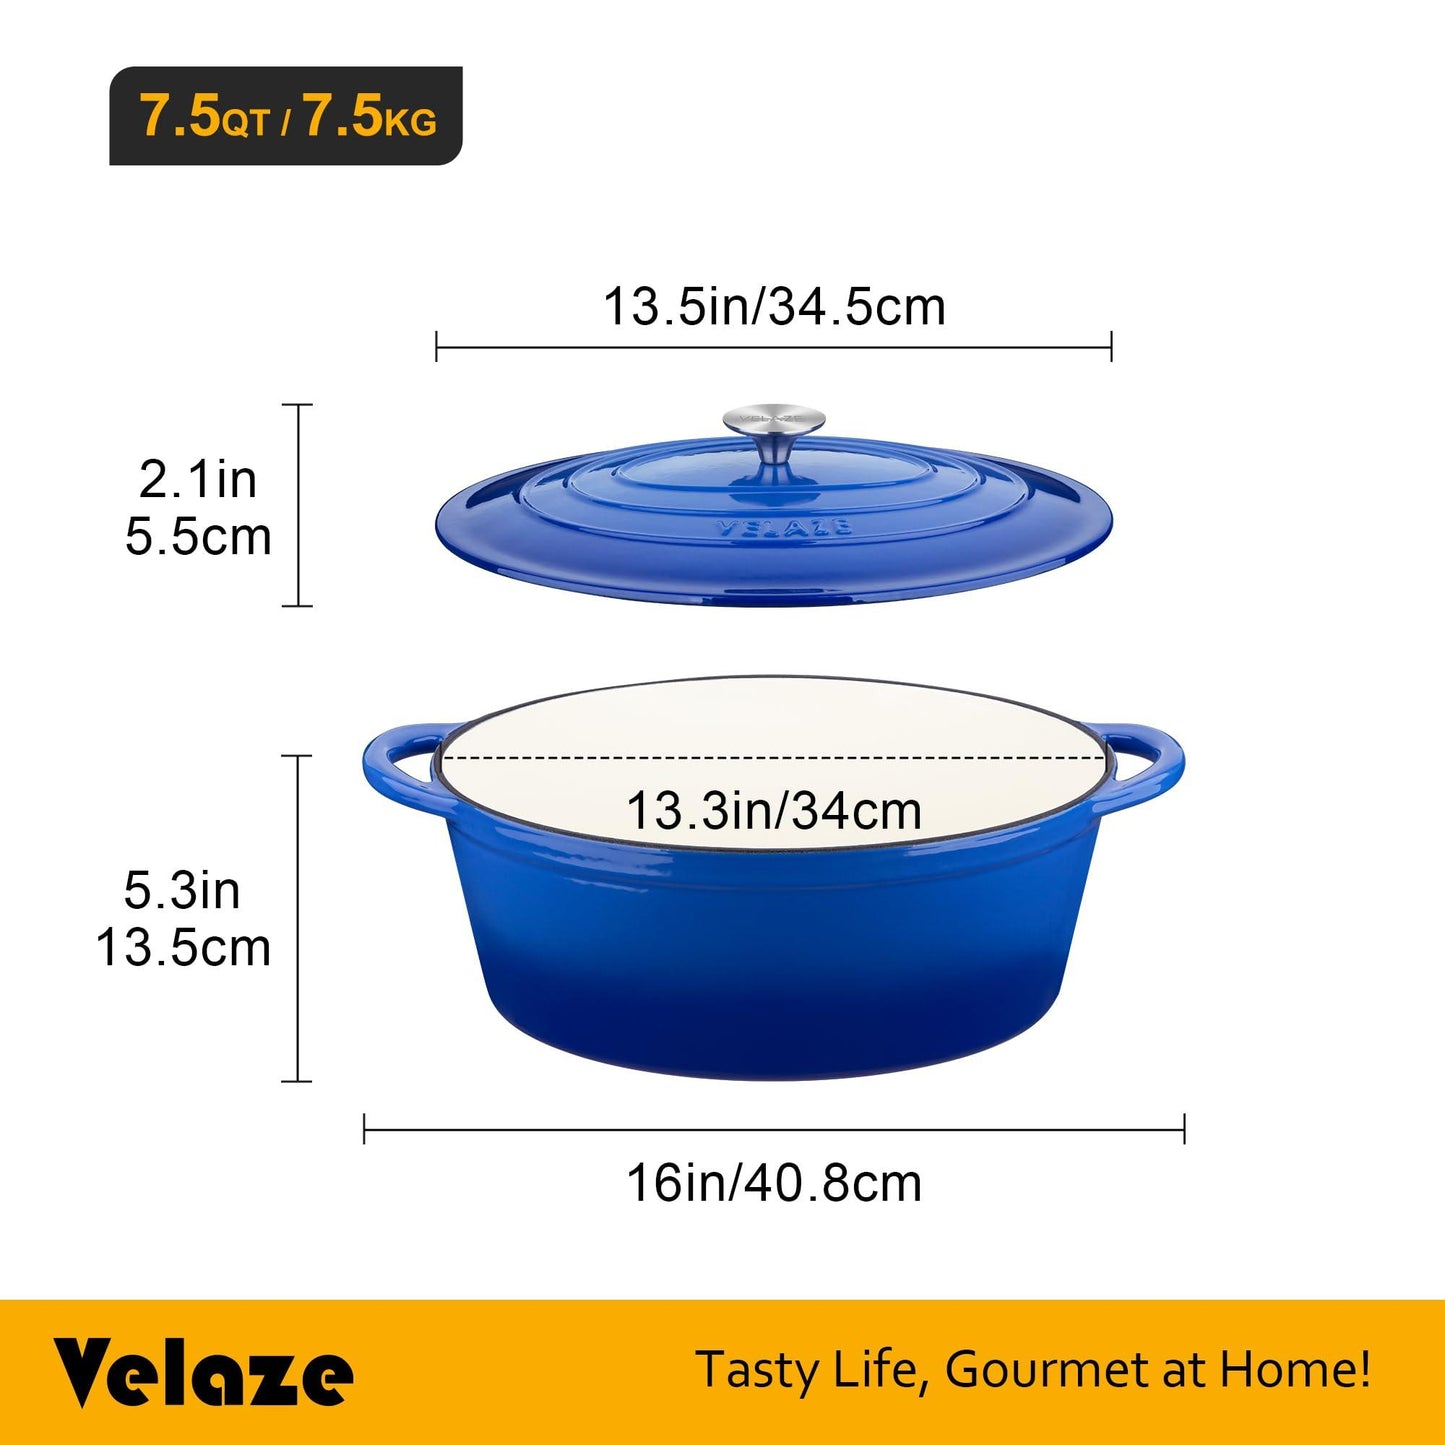 Velaze 7.5 QT Enameled Oval Dutch Oven Pot with Lid, Cast Iron Dutch Oven with Dual Handles for Bread Baking, Cooking, Frying, Non-stick Enamel Coated Cookware - CookCave